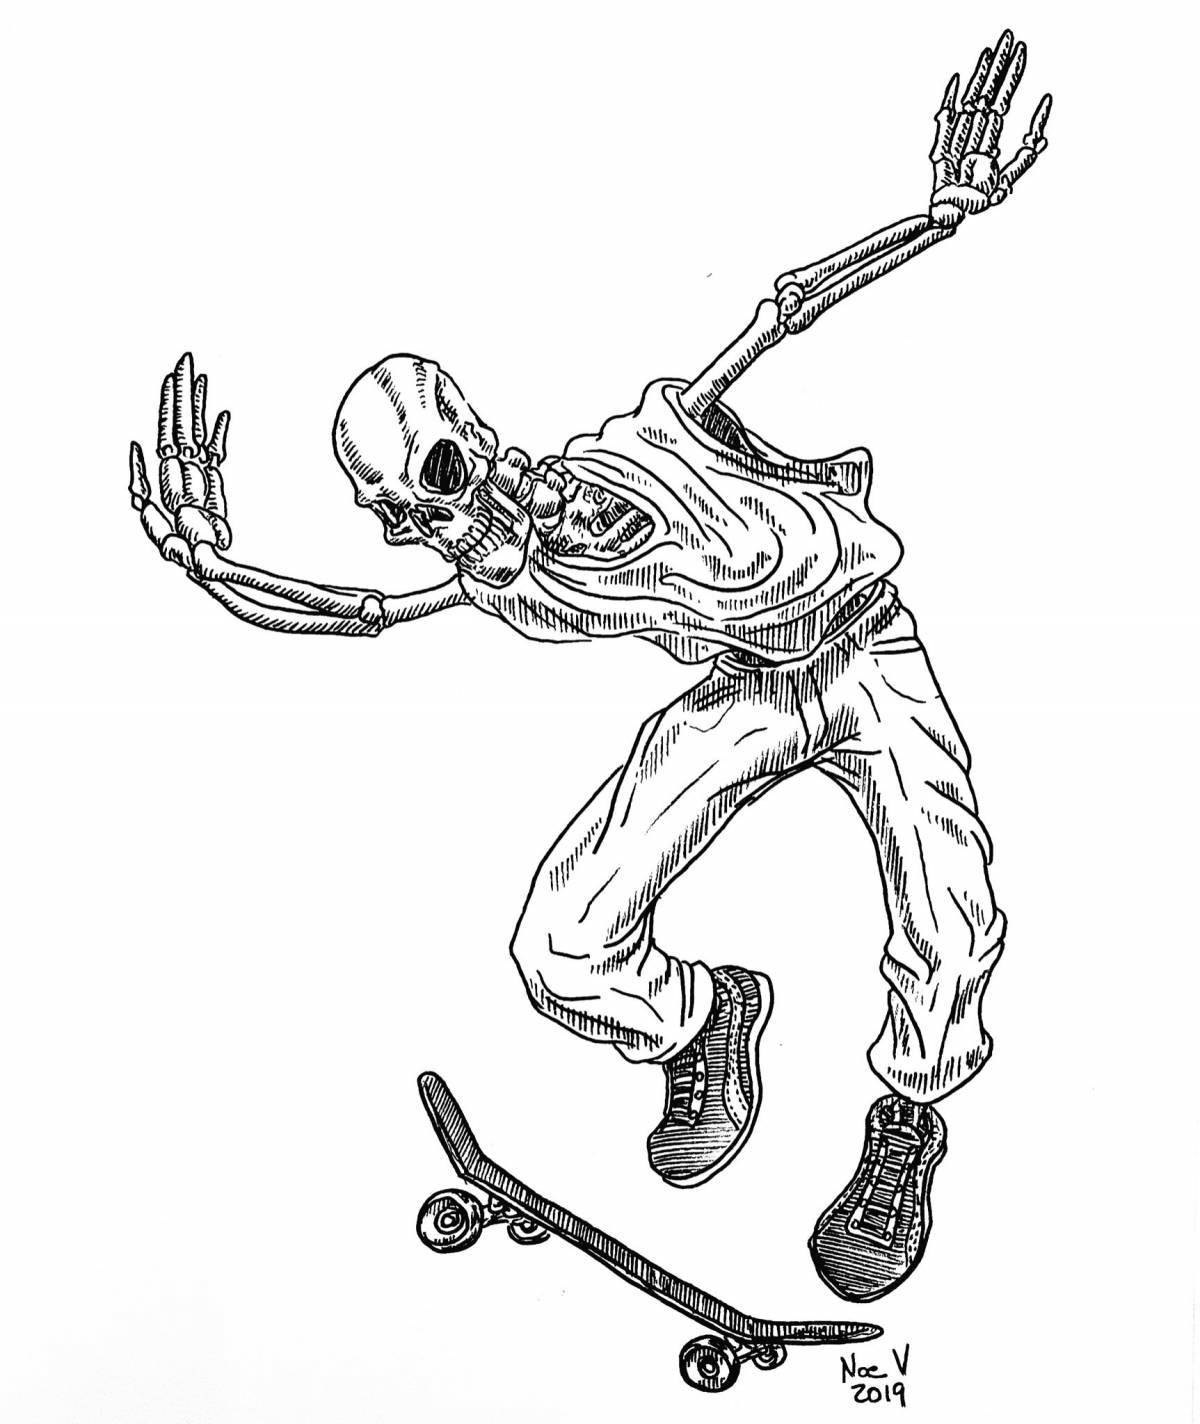 Coloring page nimble skateboarder